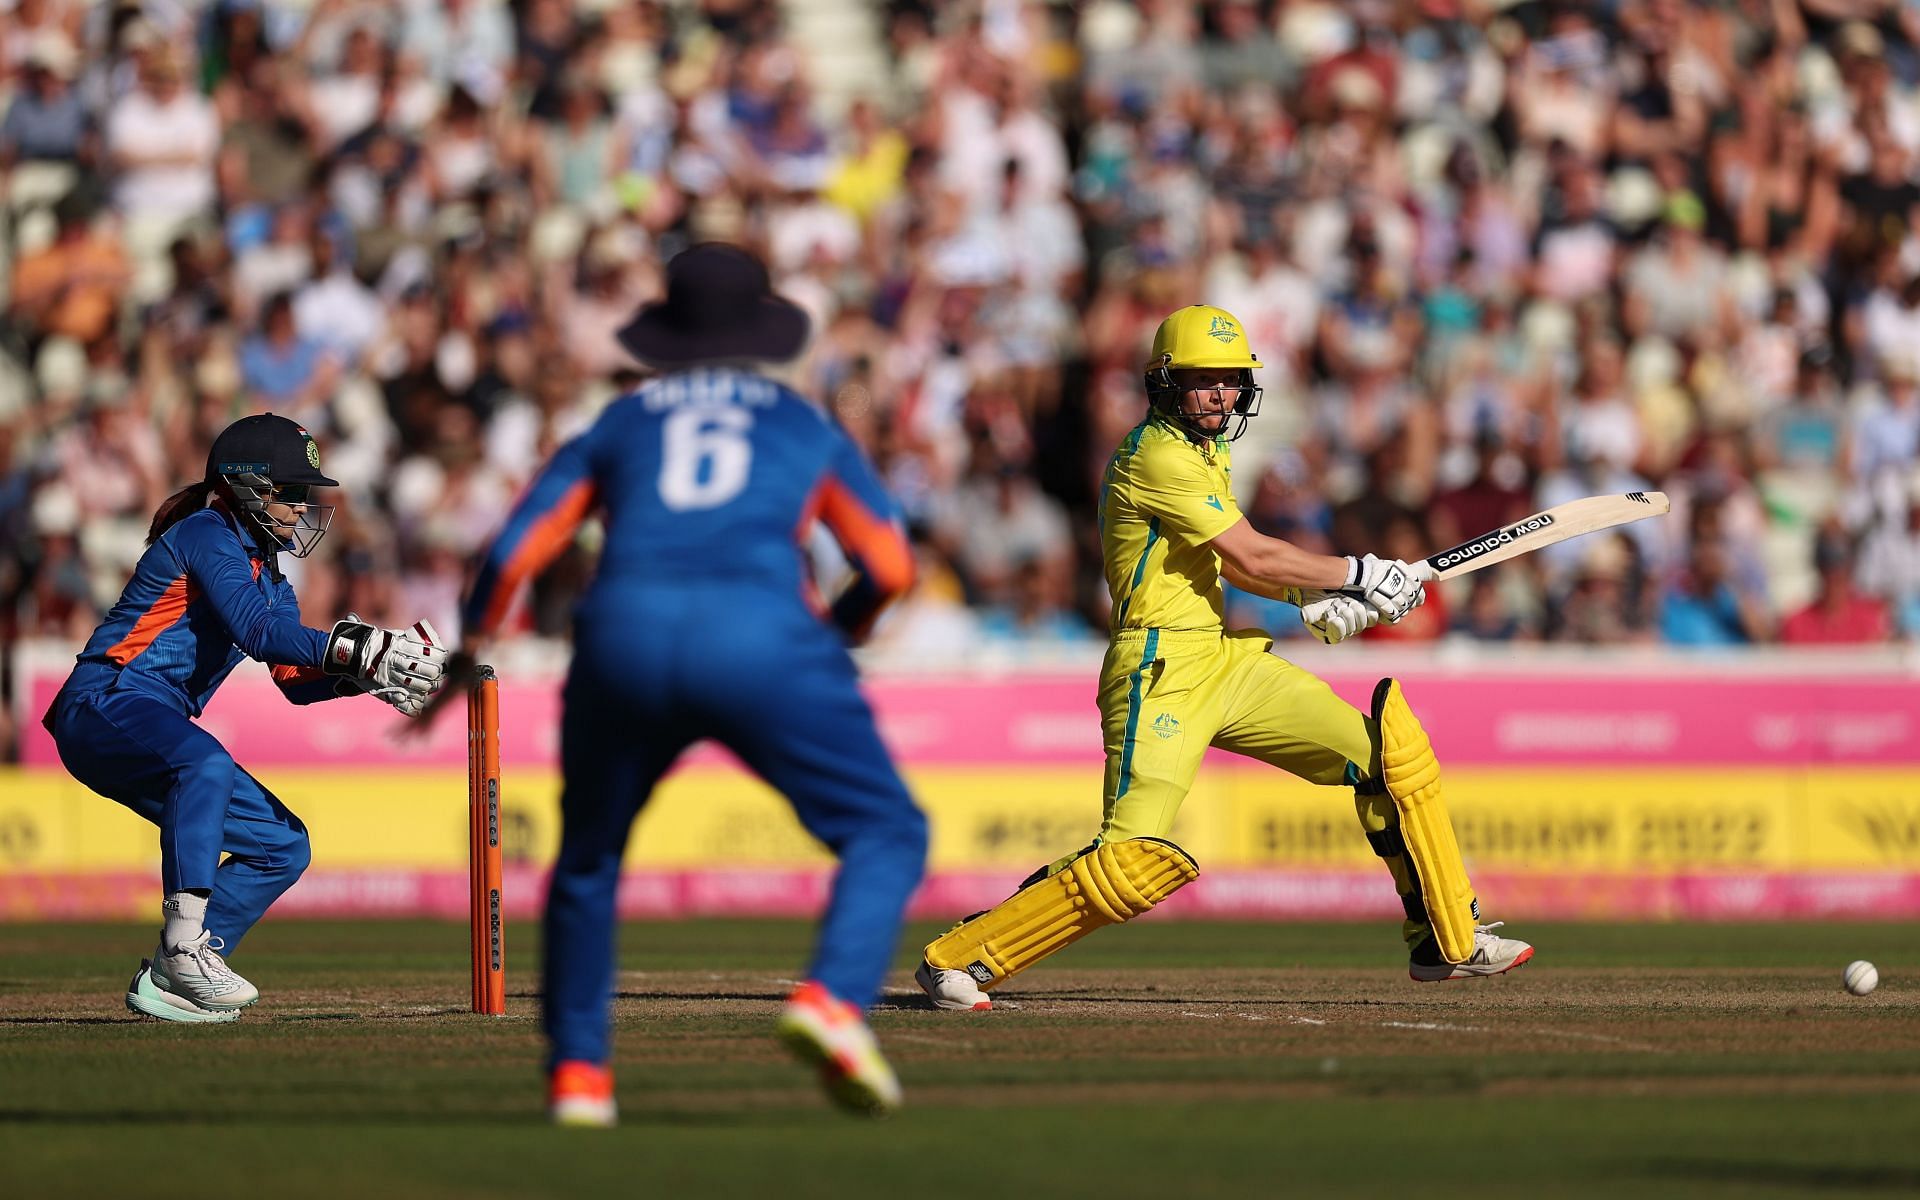 Lanning scored 36 runs in the final match of Commonwealth Games 2022 (Image: Getty)